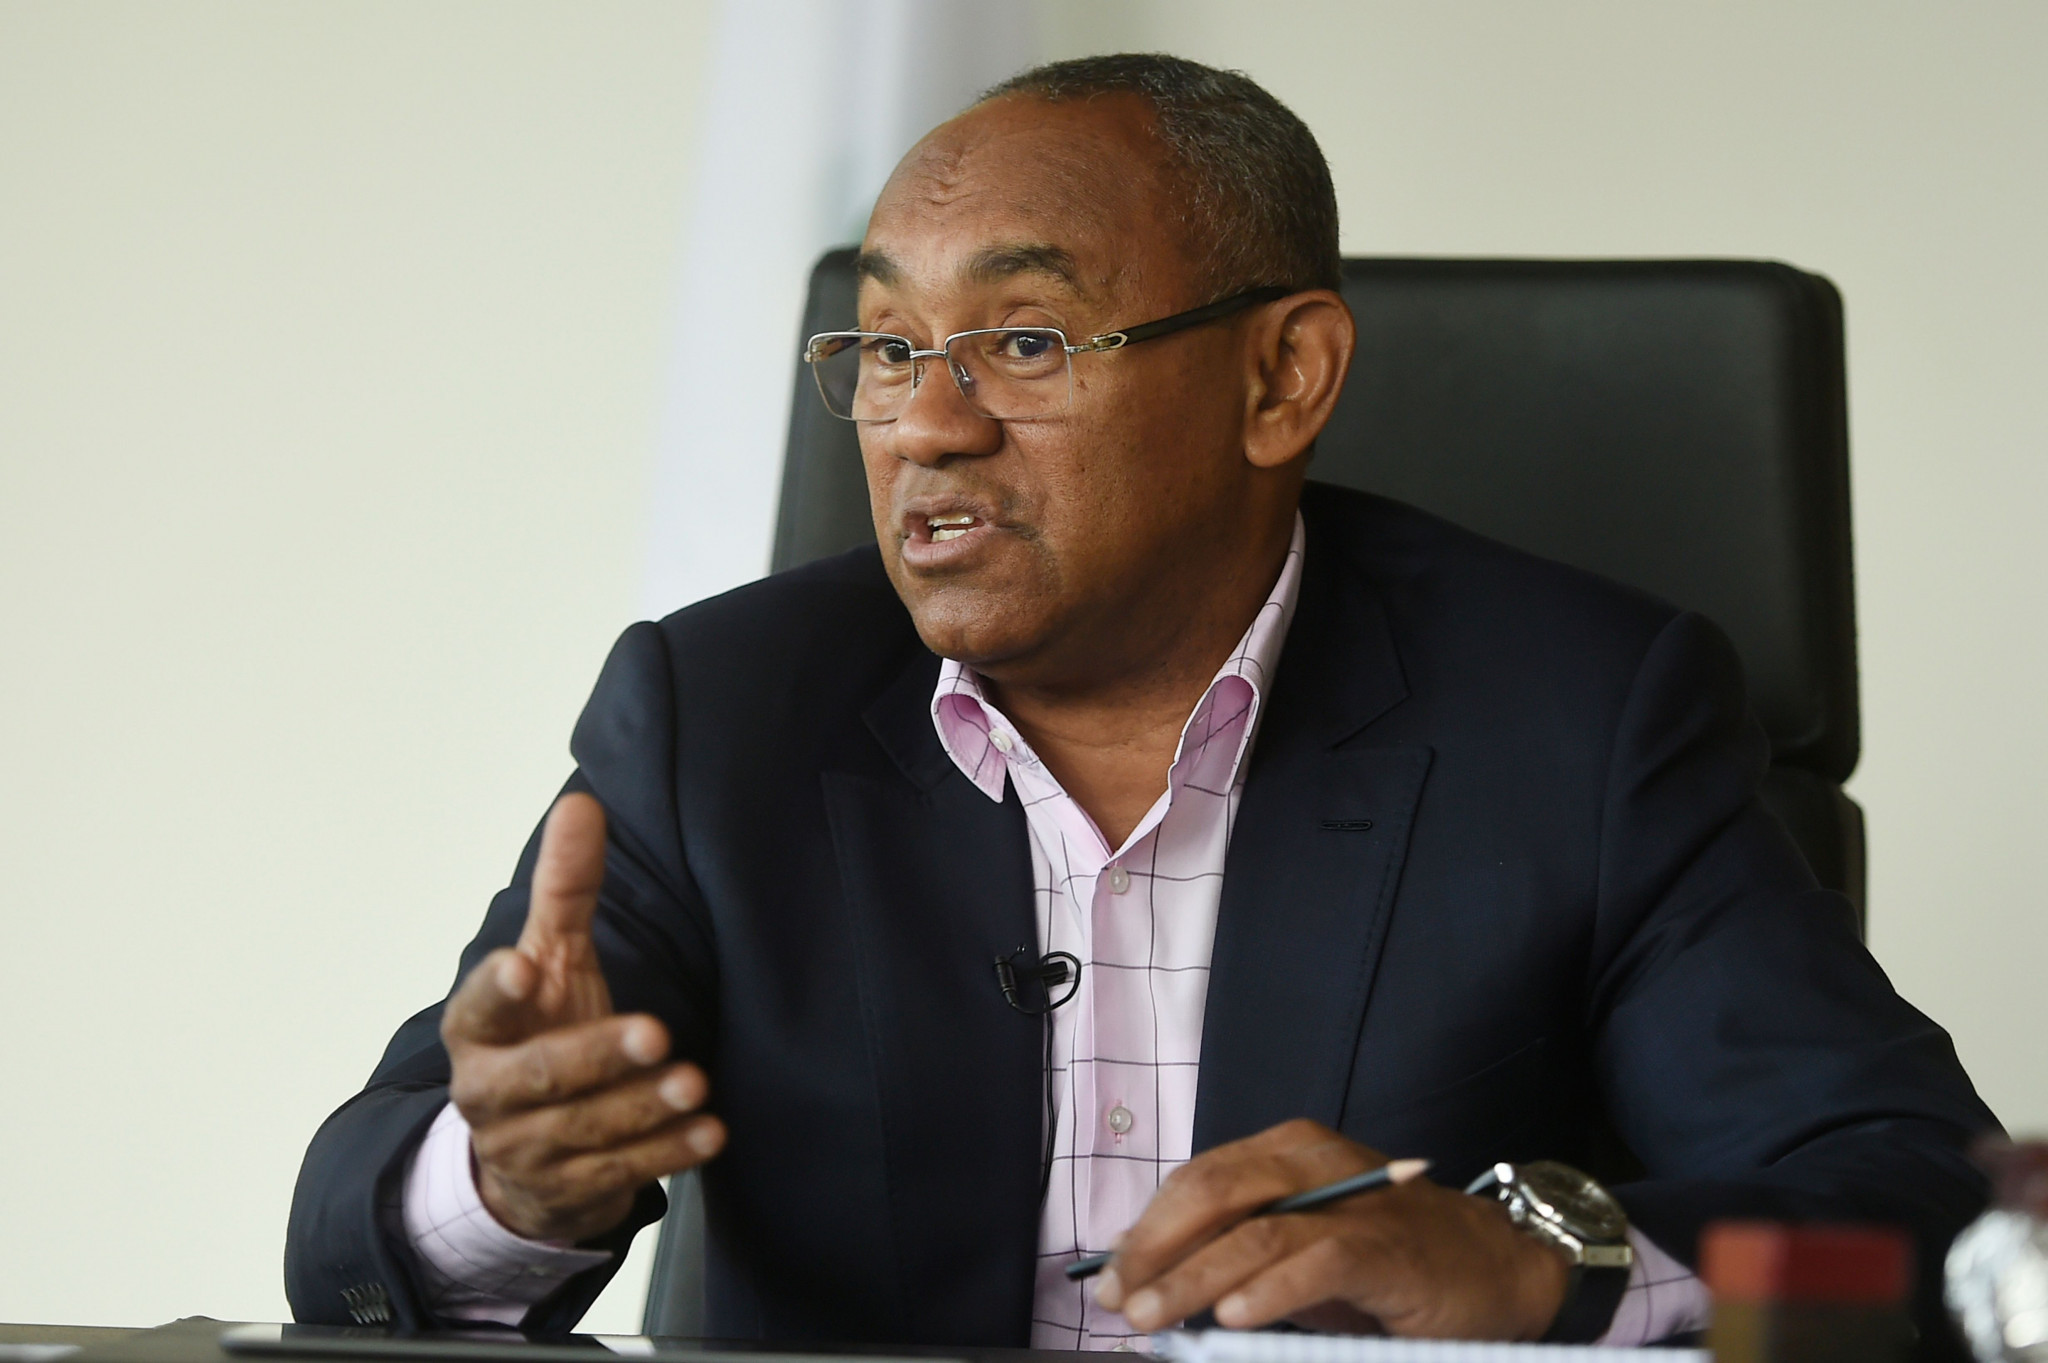 CAF President Ahmad temporarily steps aside after coronavirus scare